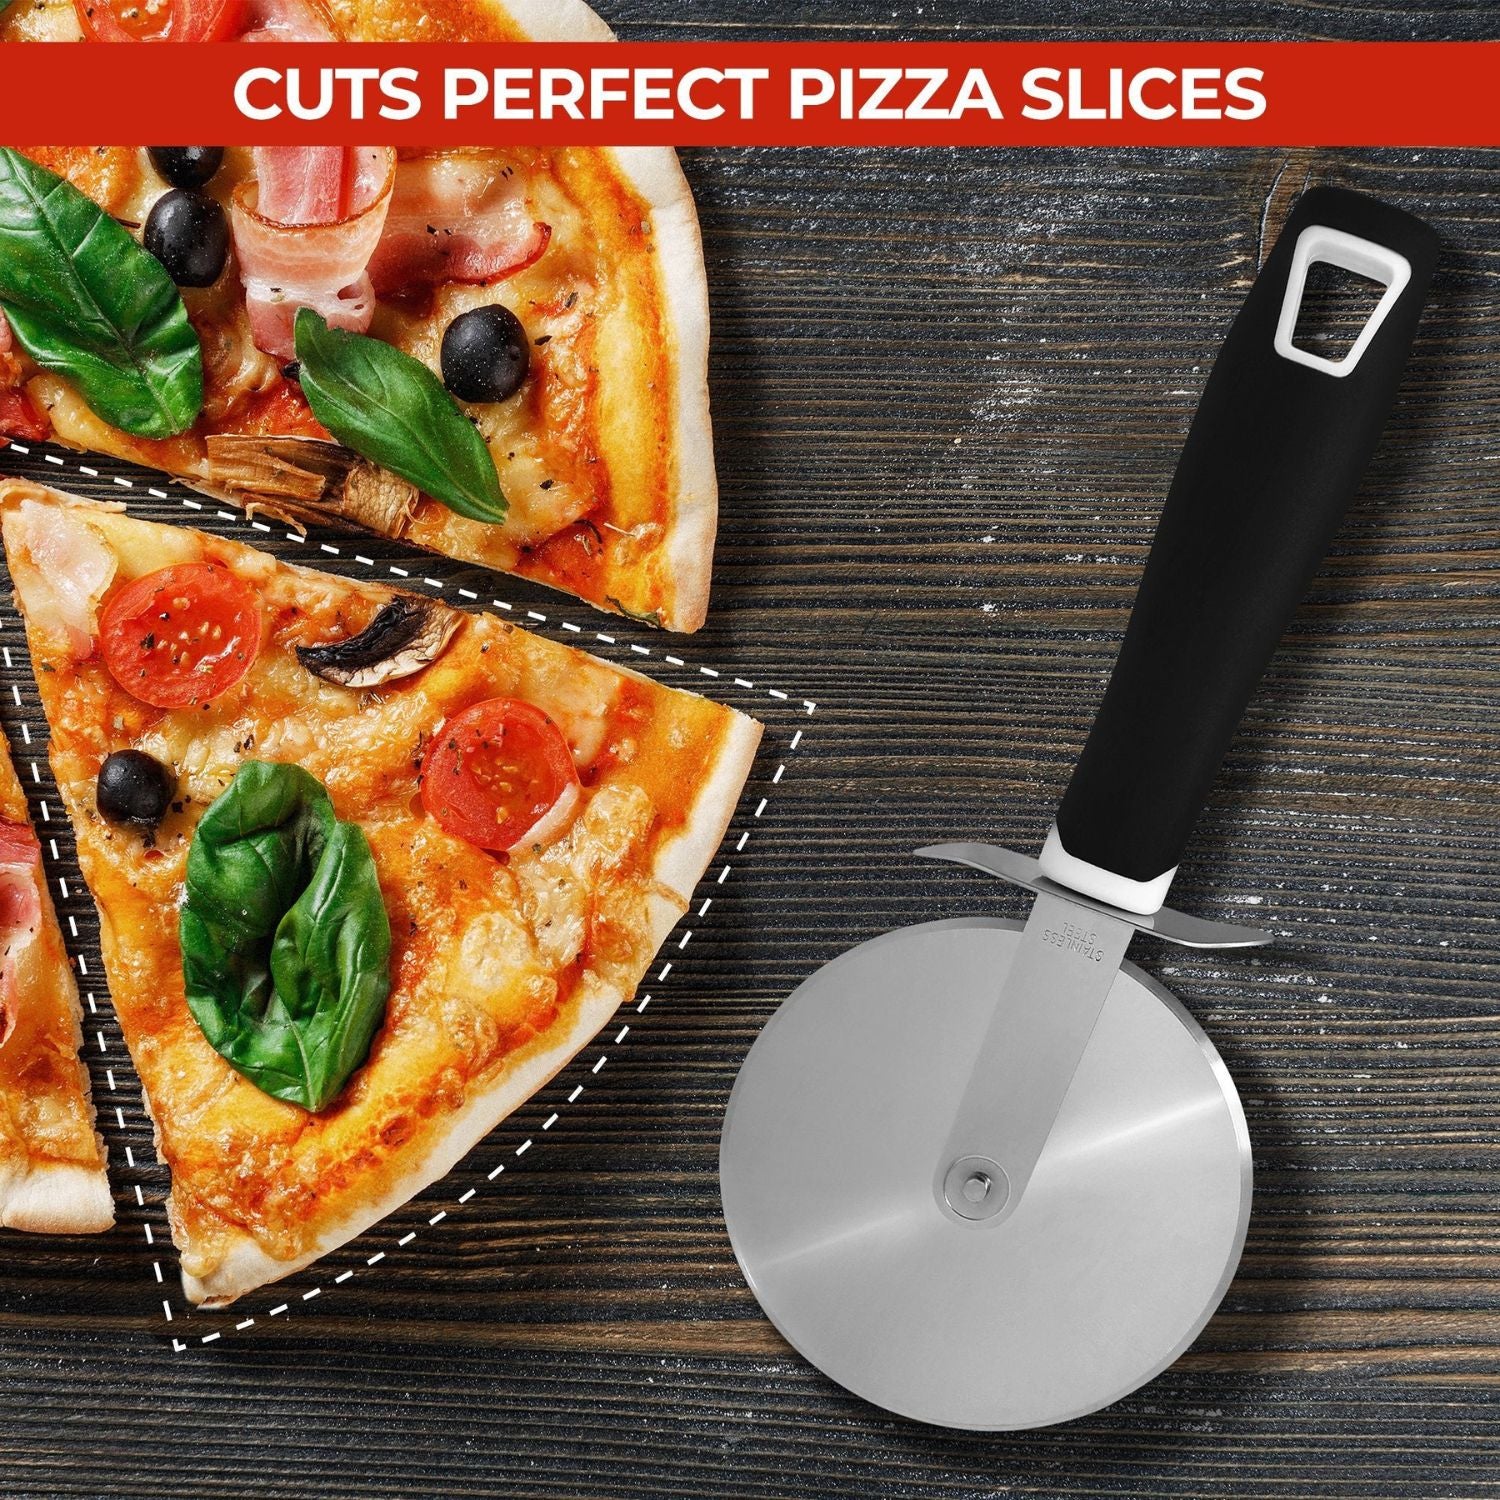 perfect pizza slices using Zulay kitchen Pizza Cutter Wheel 